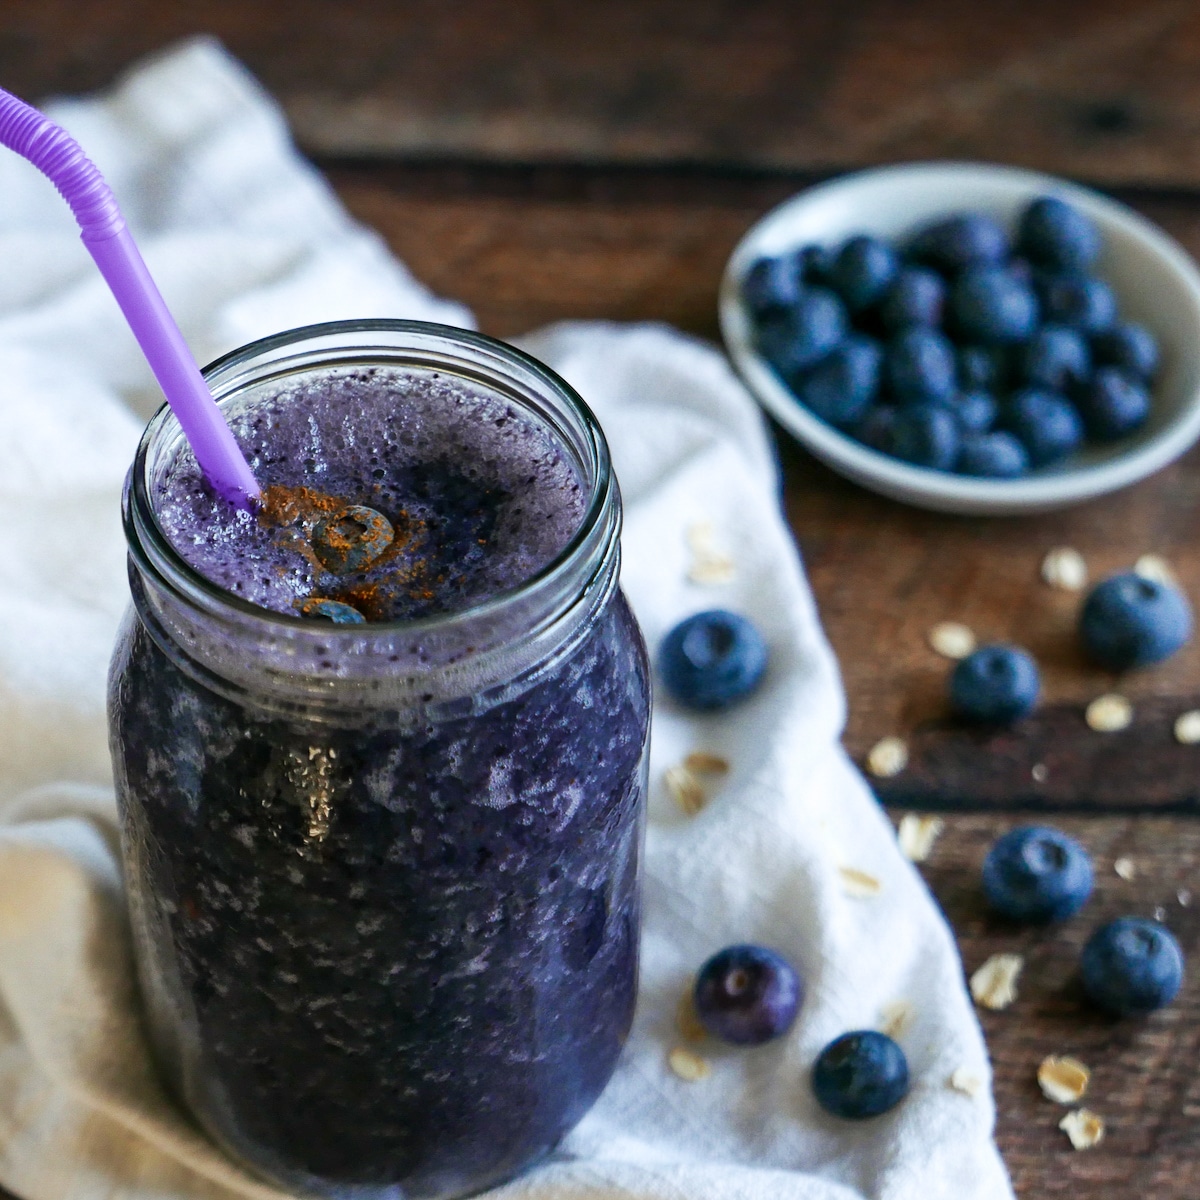 Smoothie in a glass jar and a cup of blueberries in the background.